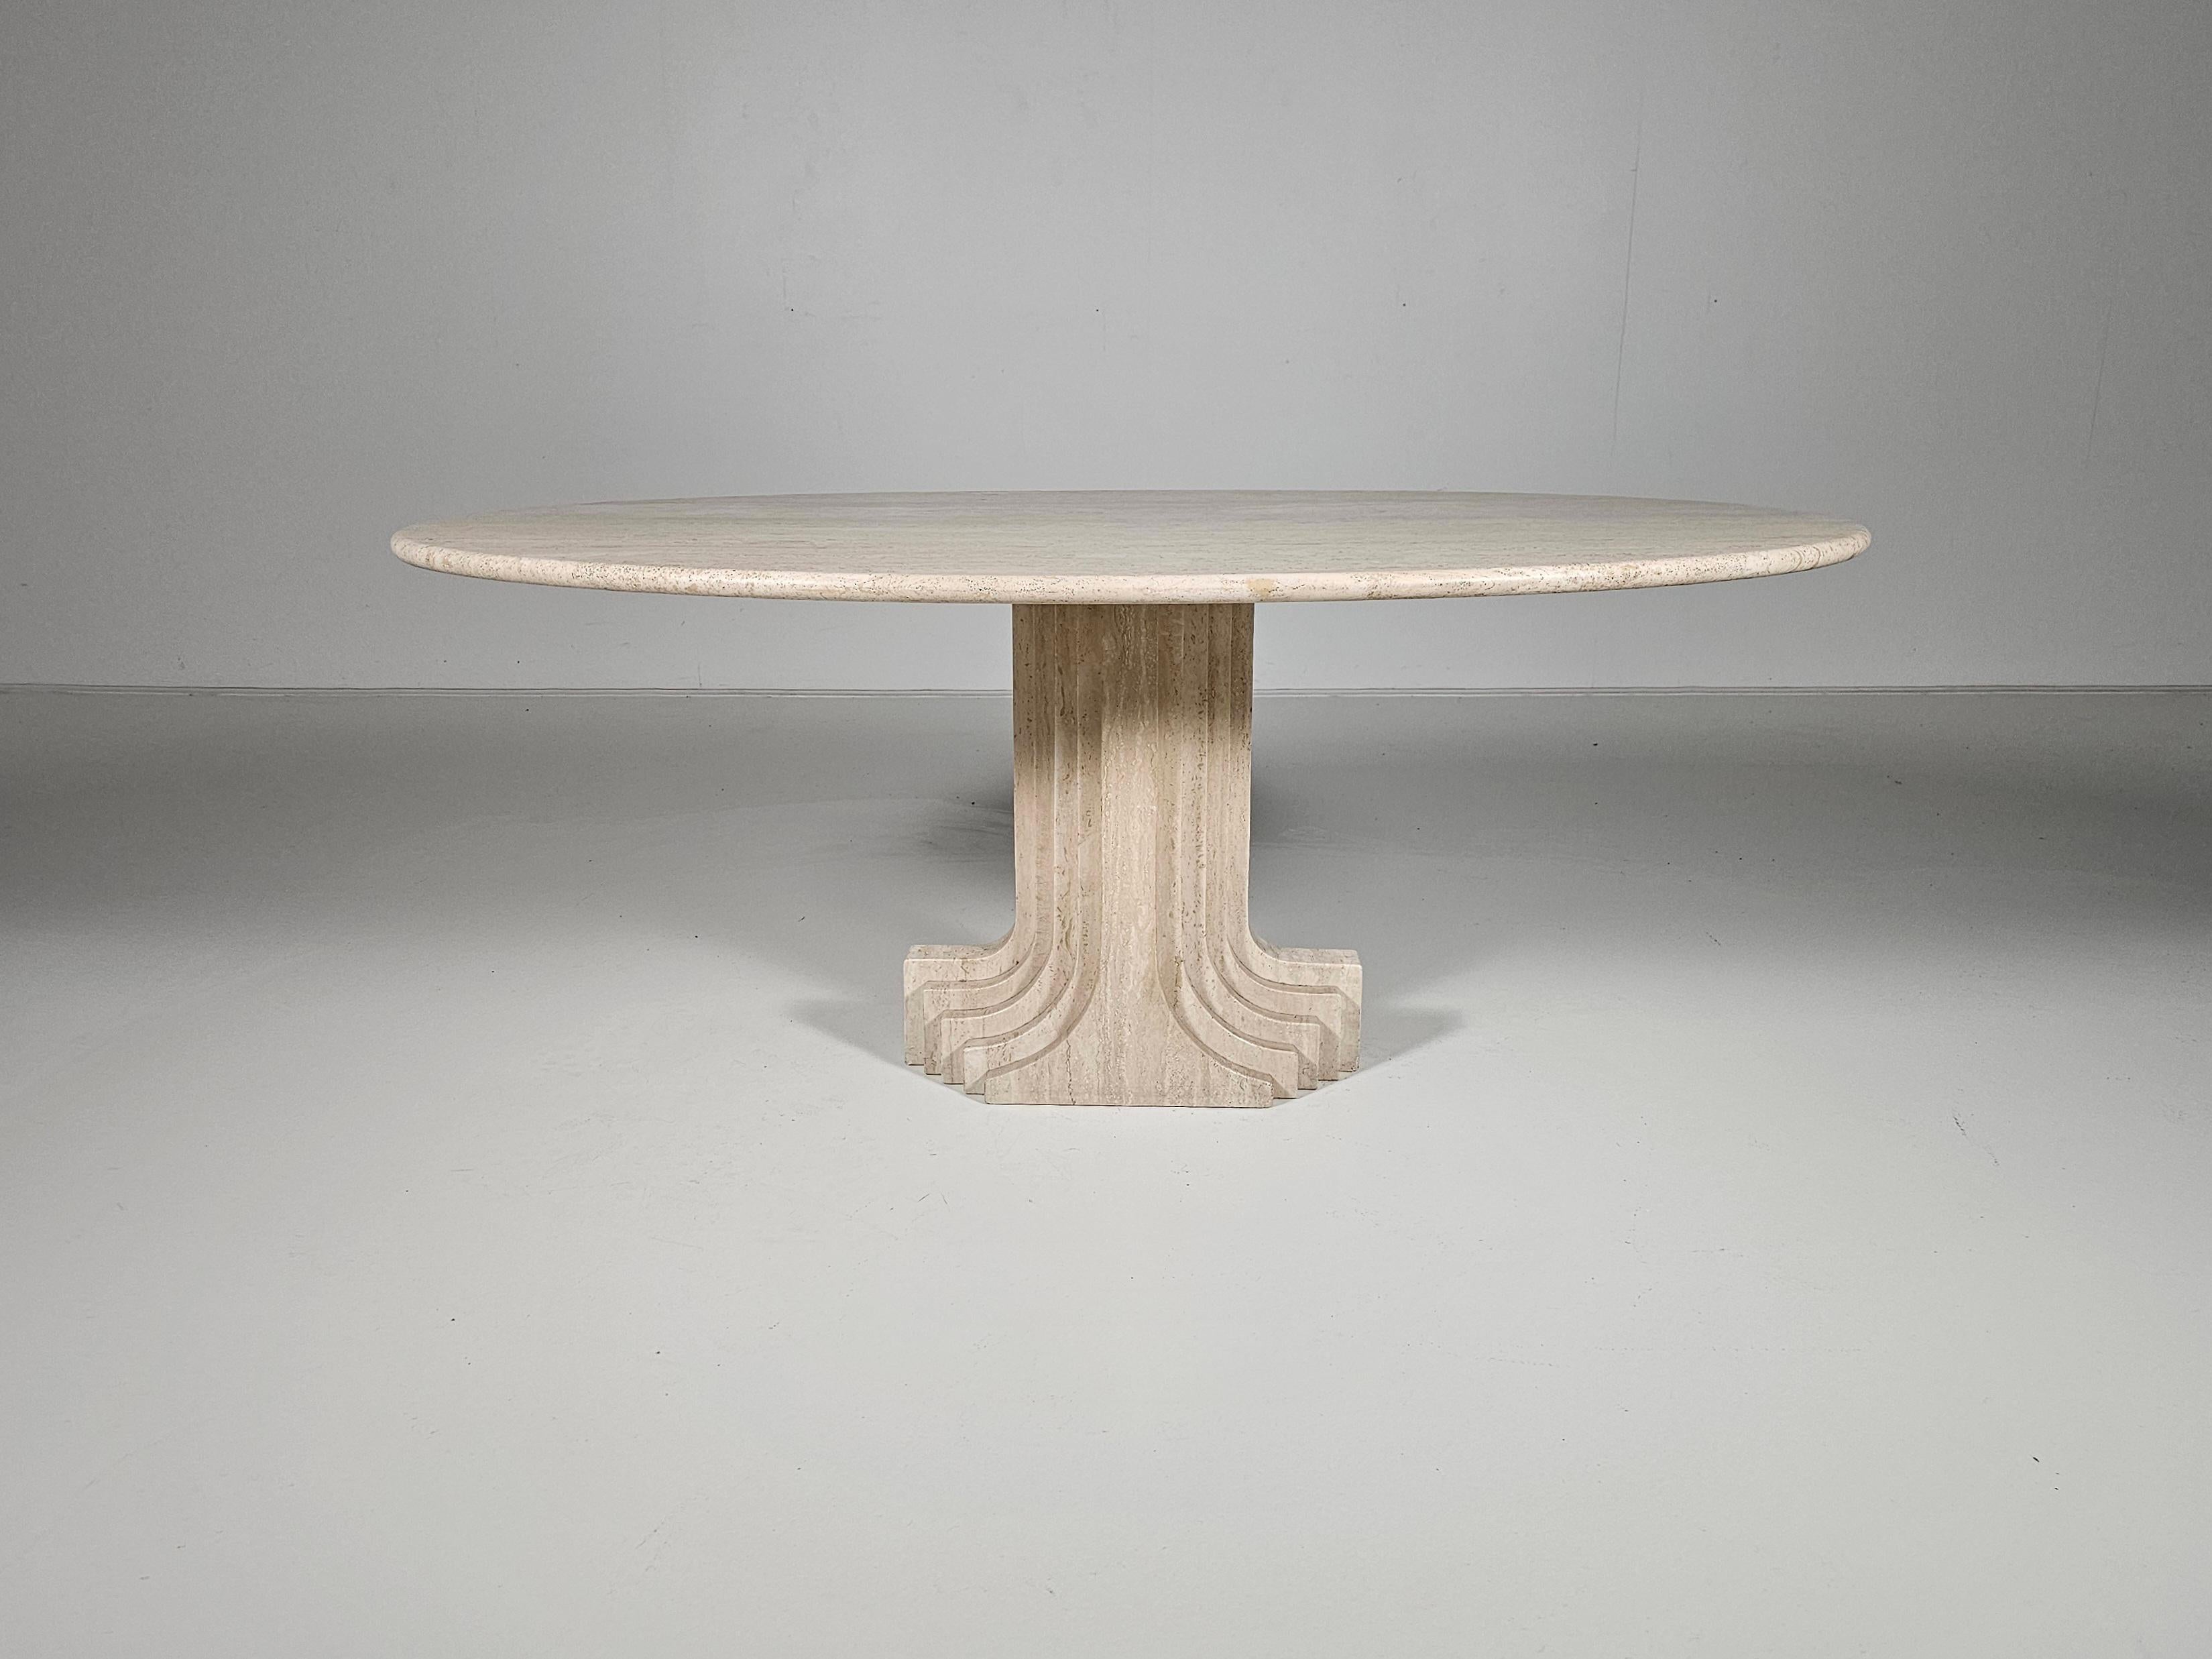 Dining table designed in 1970 by Carlo Scarpa for the 